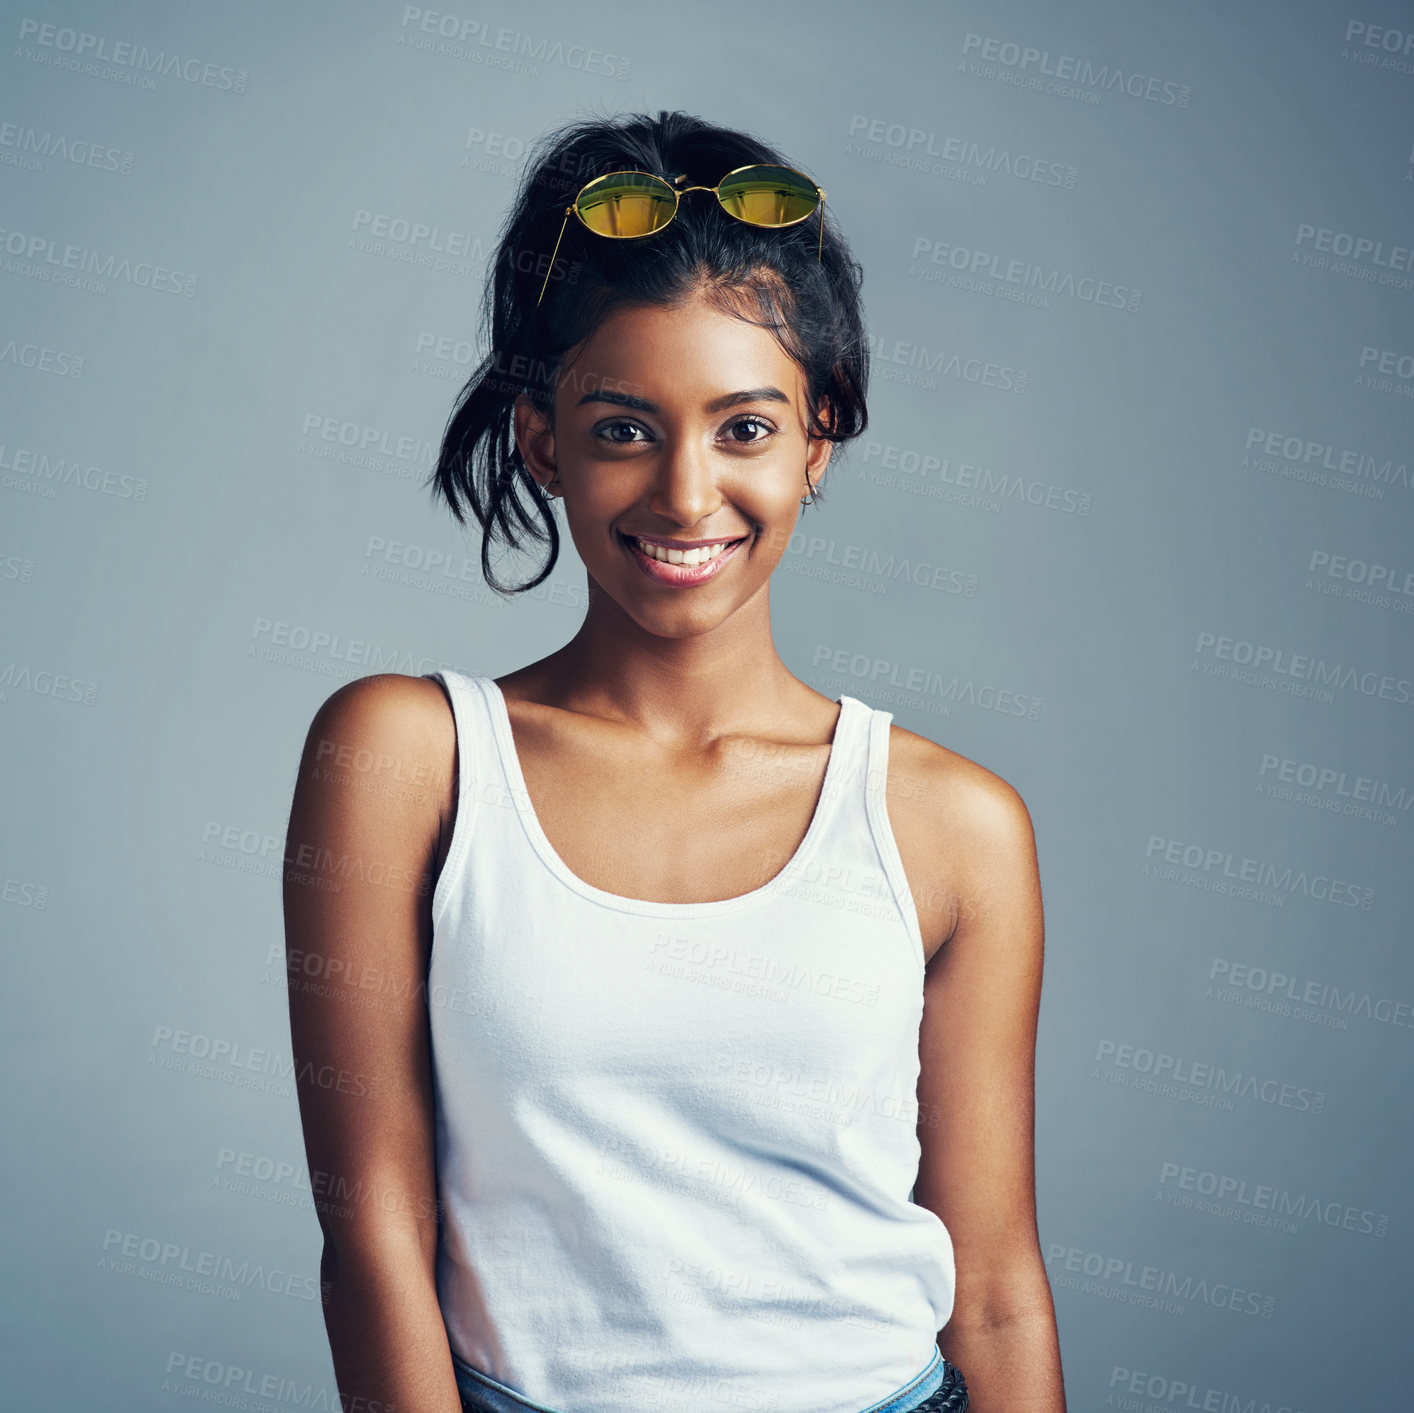 Buy stock photo Studio portrait of a beautiful young woman posing against a grey background